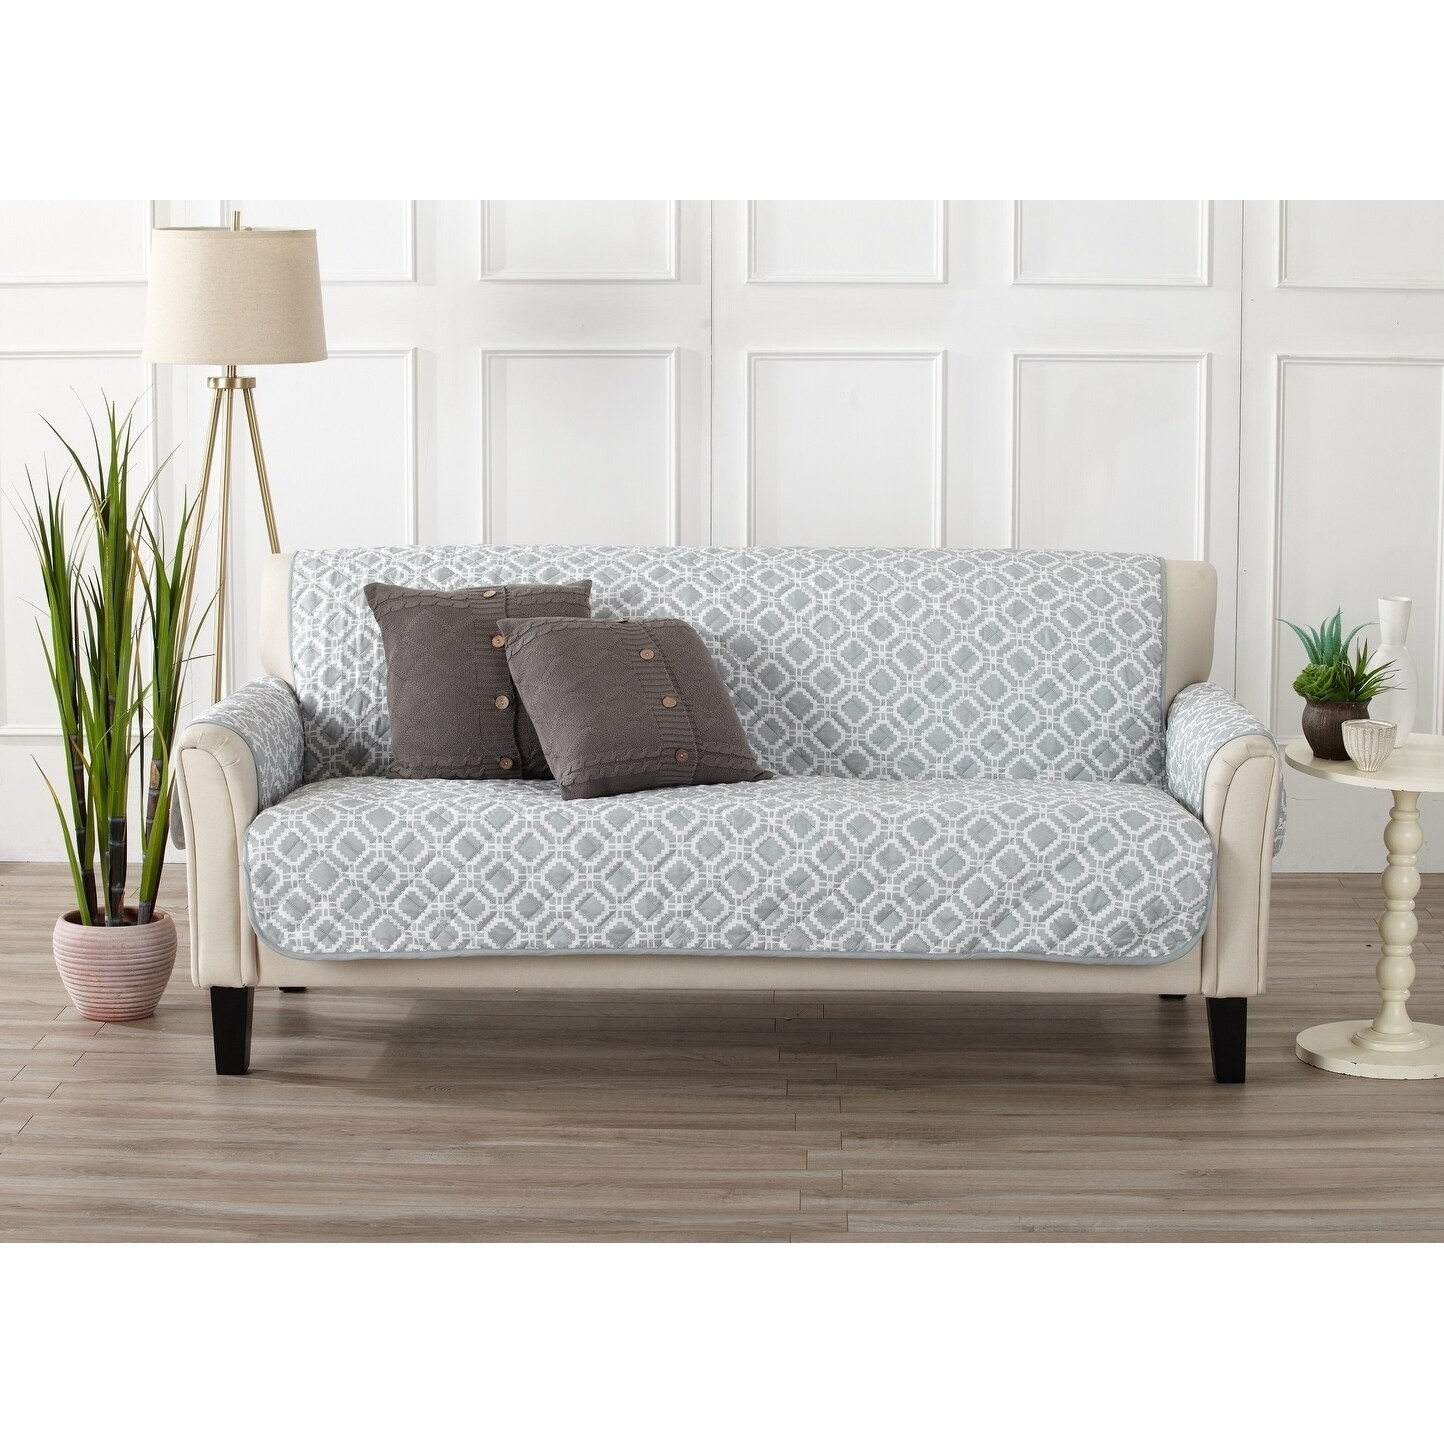 Two Fresh for sale online hOme Fashion Designs Deluxe Reversible Quilted Furniture Protector 